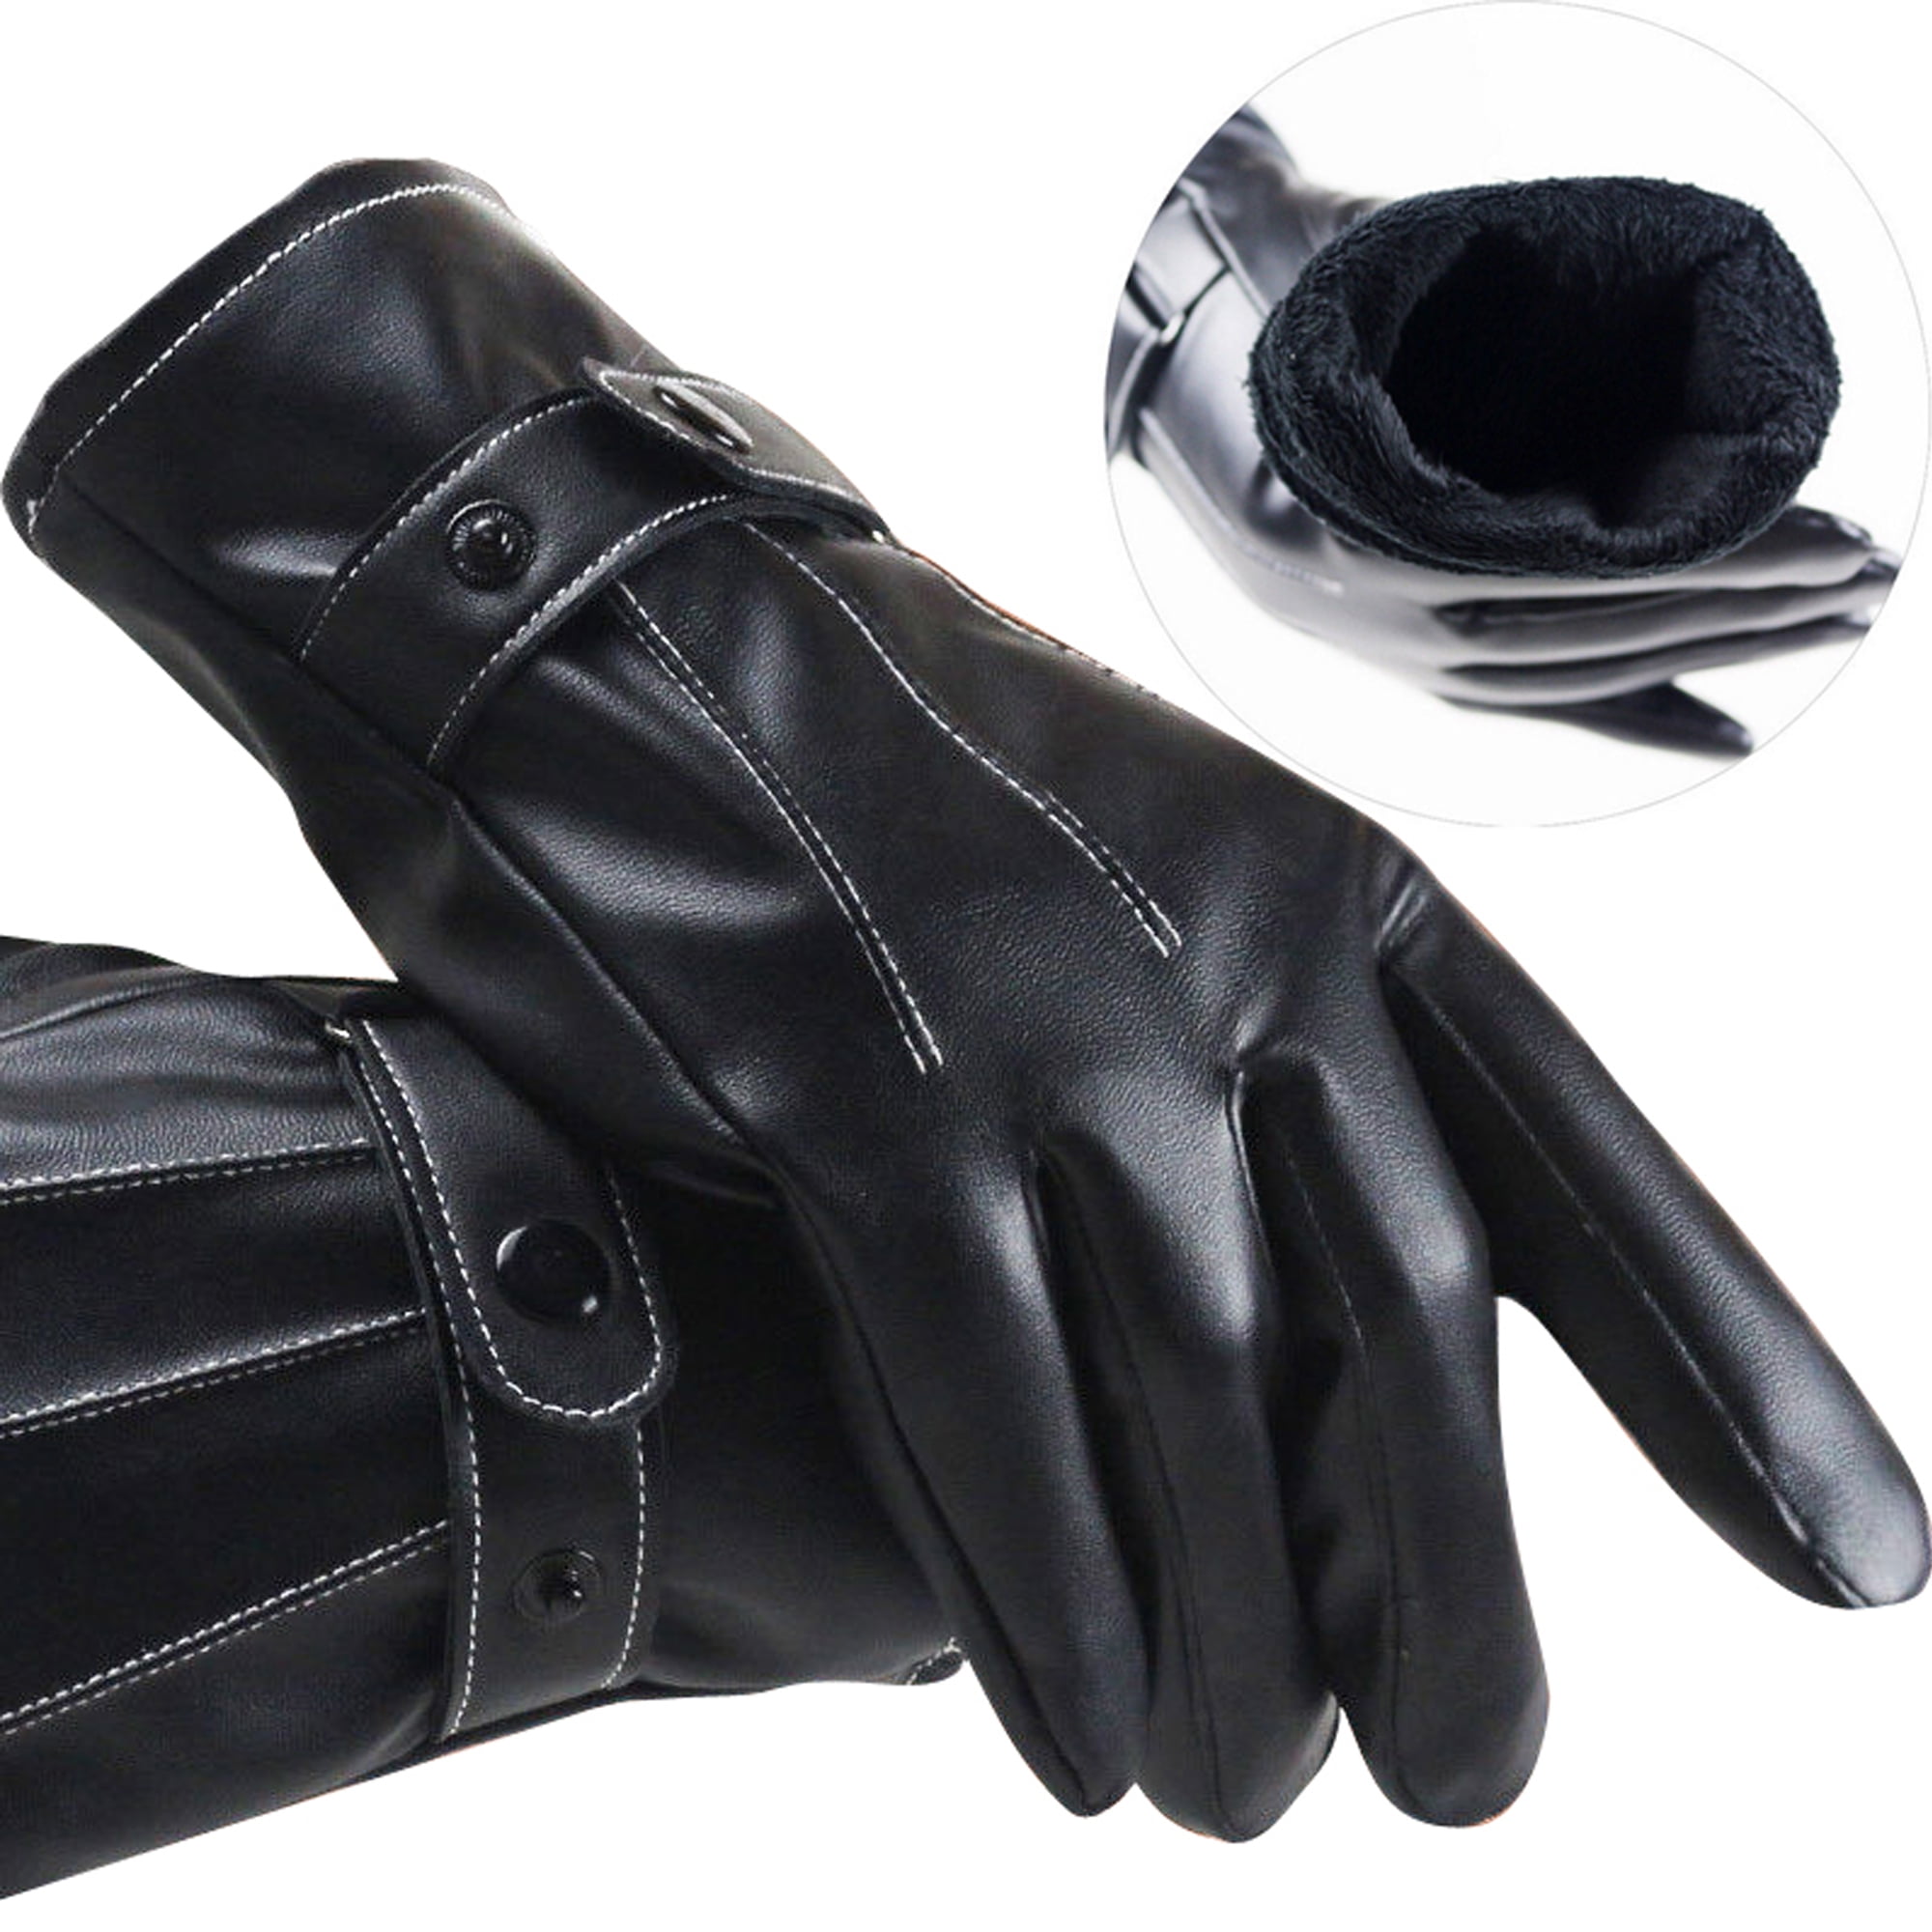 Mens Winter Warm Gloves Suede Leather Full Finger Touch Screen Fashion 4 Colors 